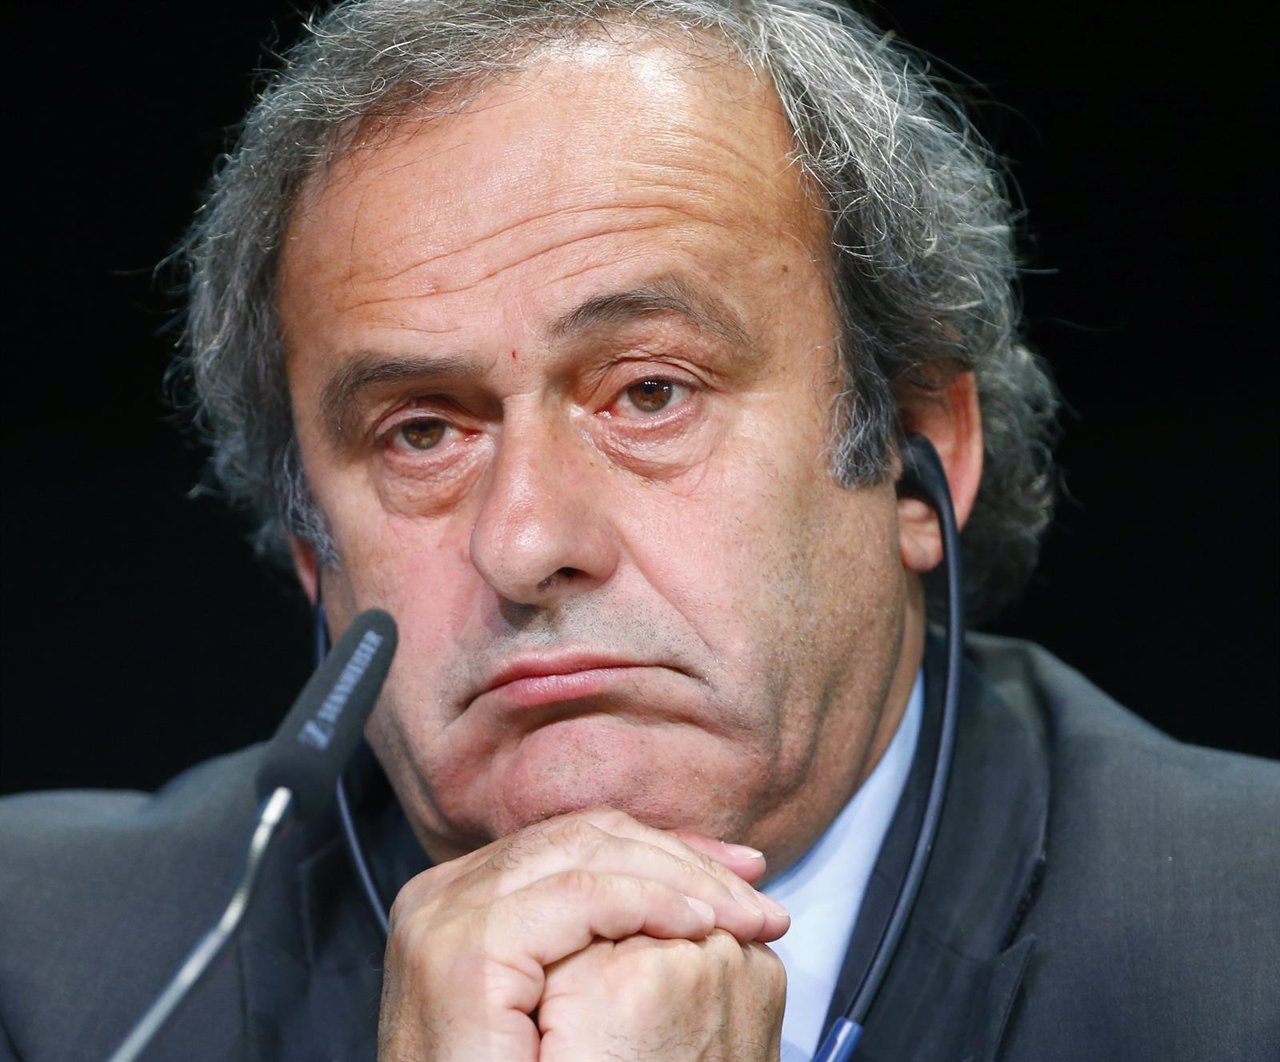 UEFA President Platini addresses a news conference after a UEFA meeting 